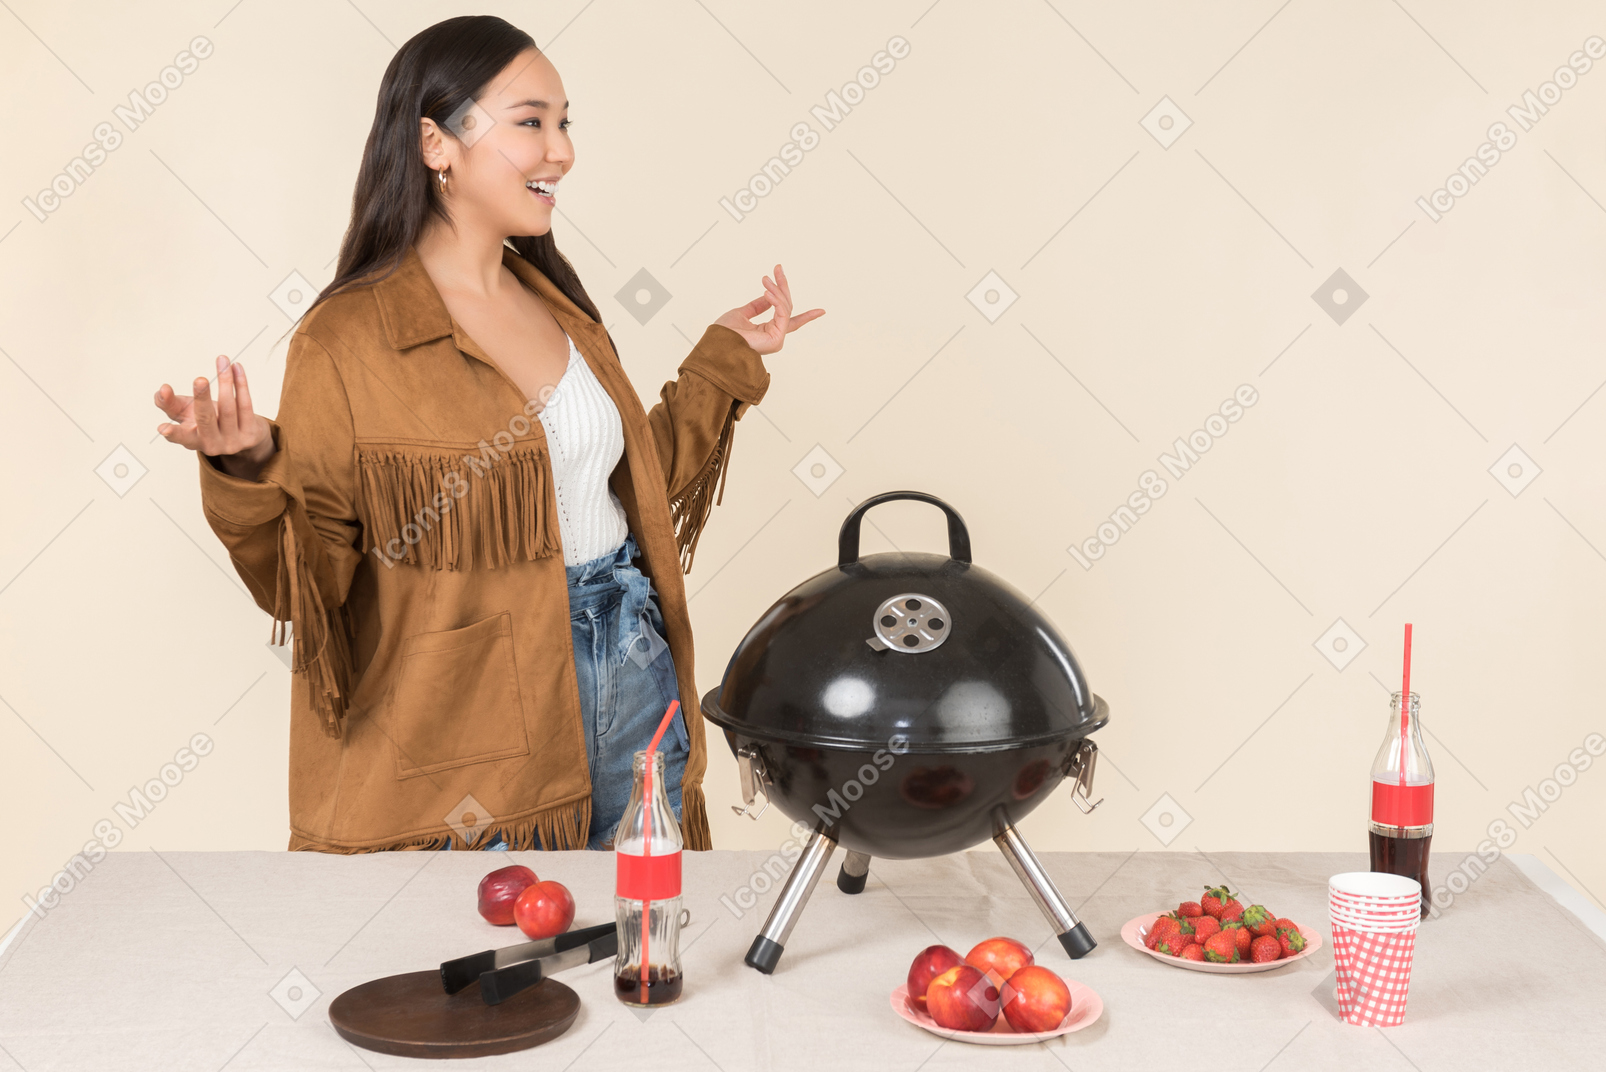 Young asian woman standing near closed grill on the table